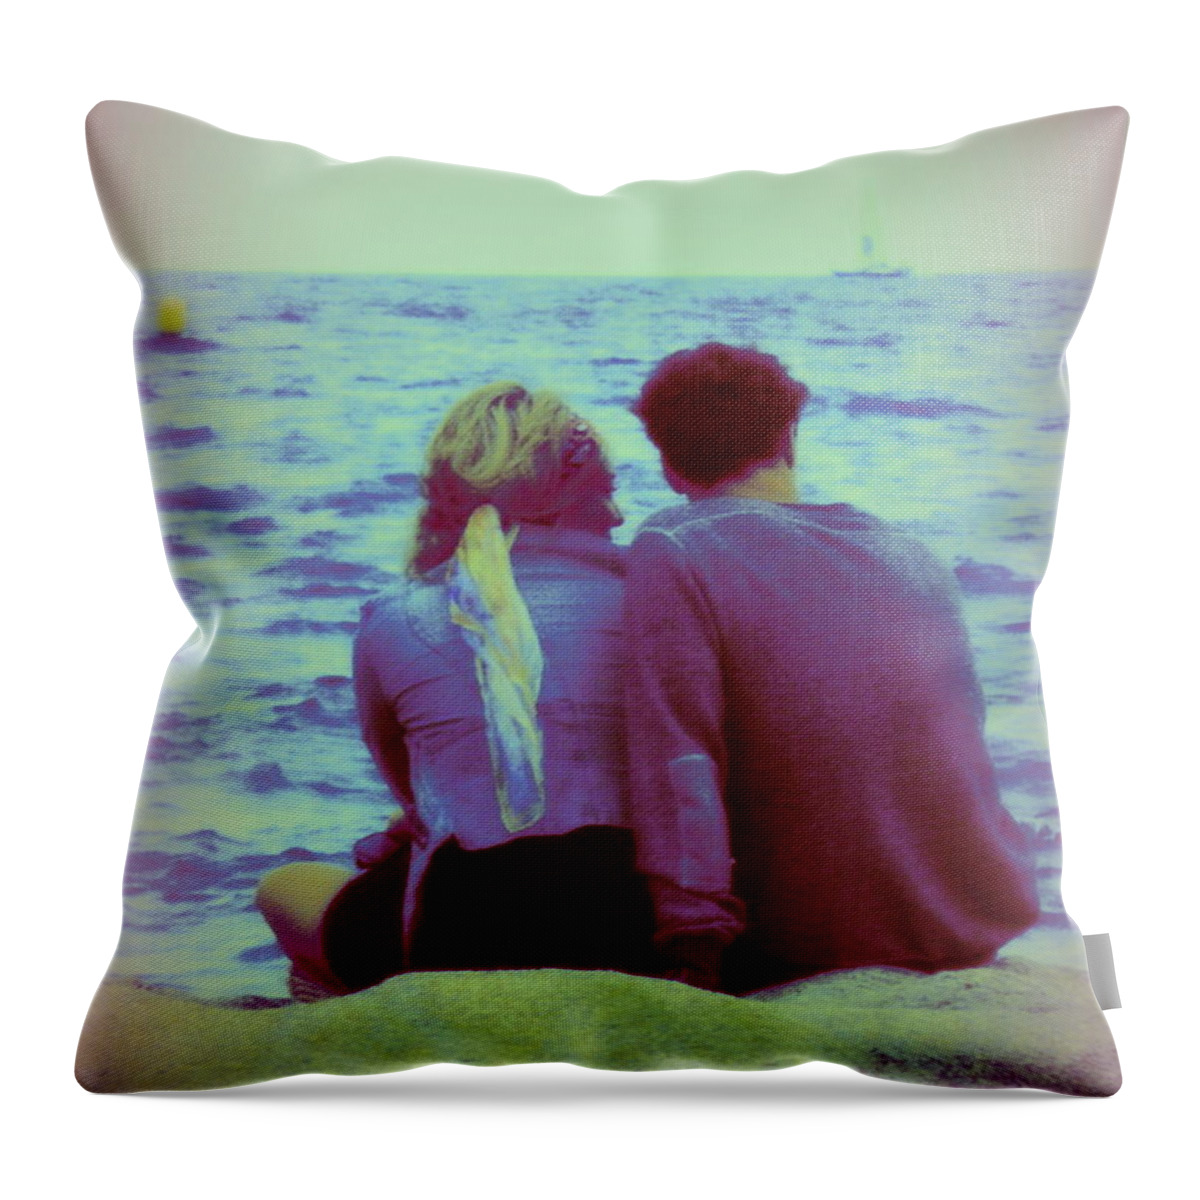 Couple Throw Pillow featuring the photograph Romantic Seaside Moment by Lainie Wrightson